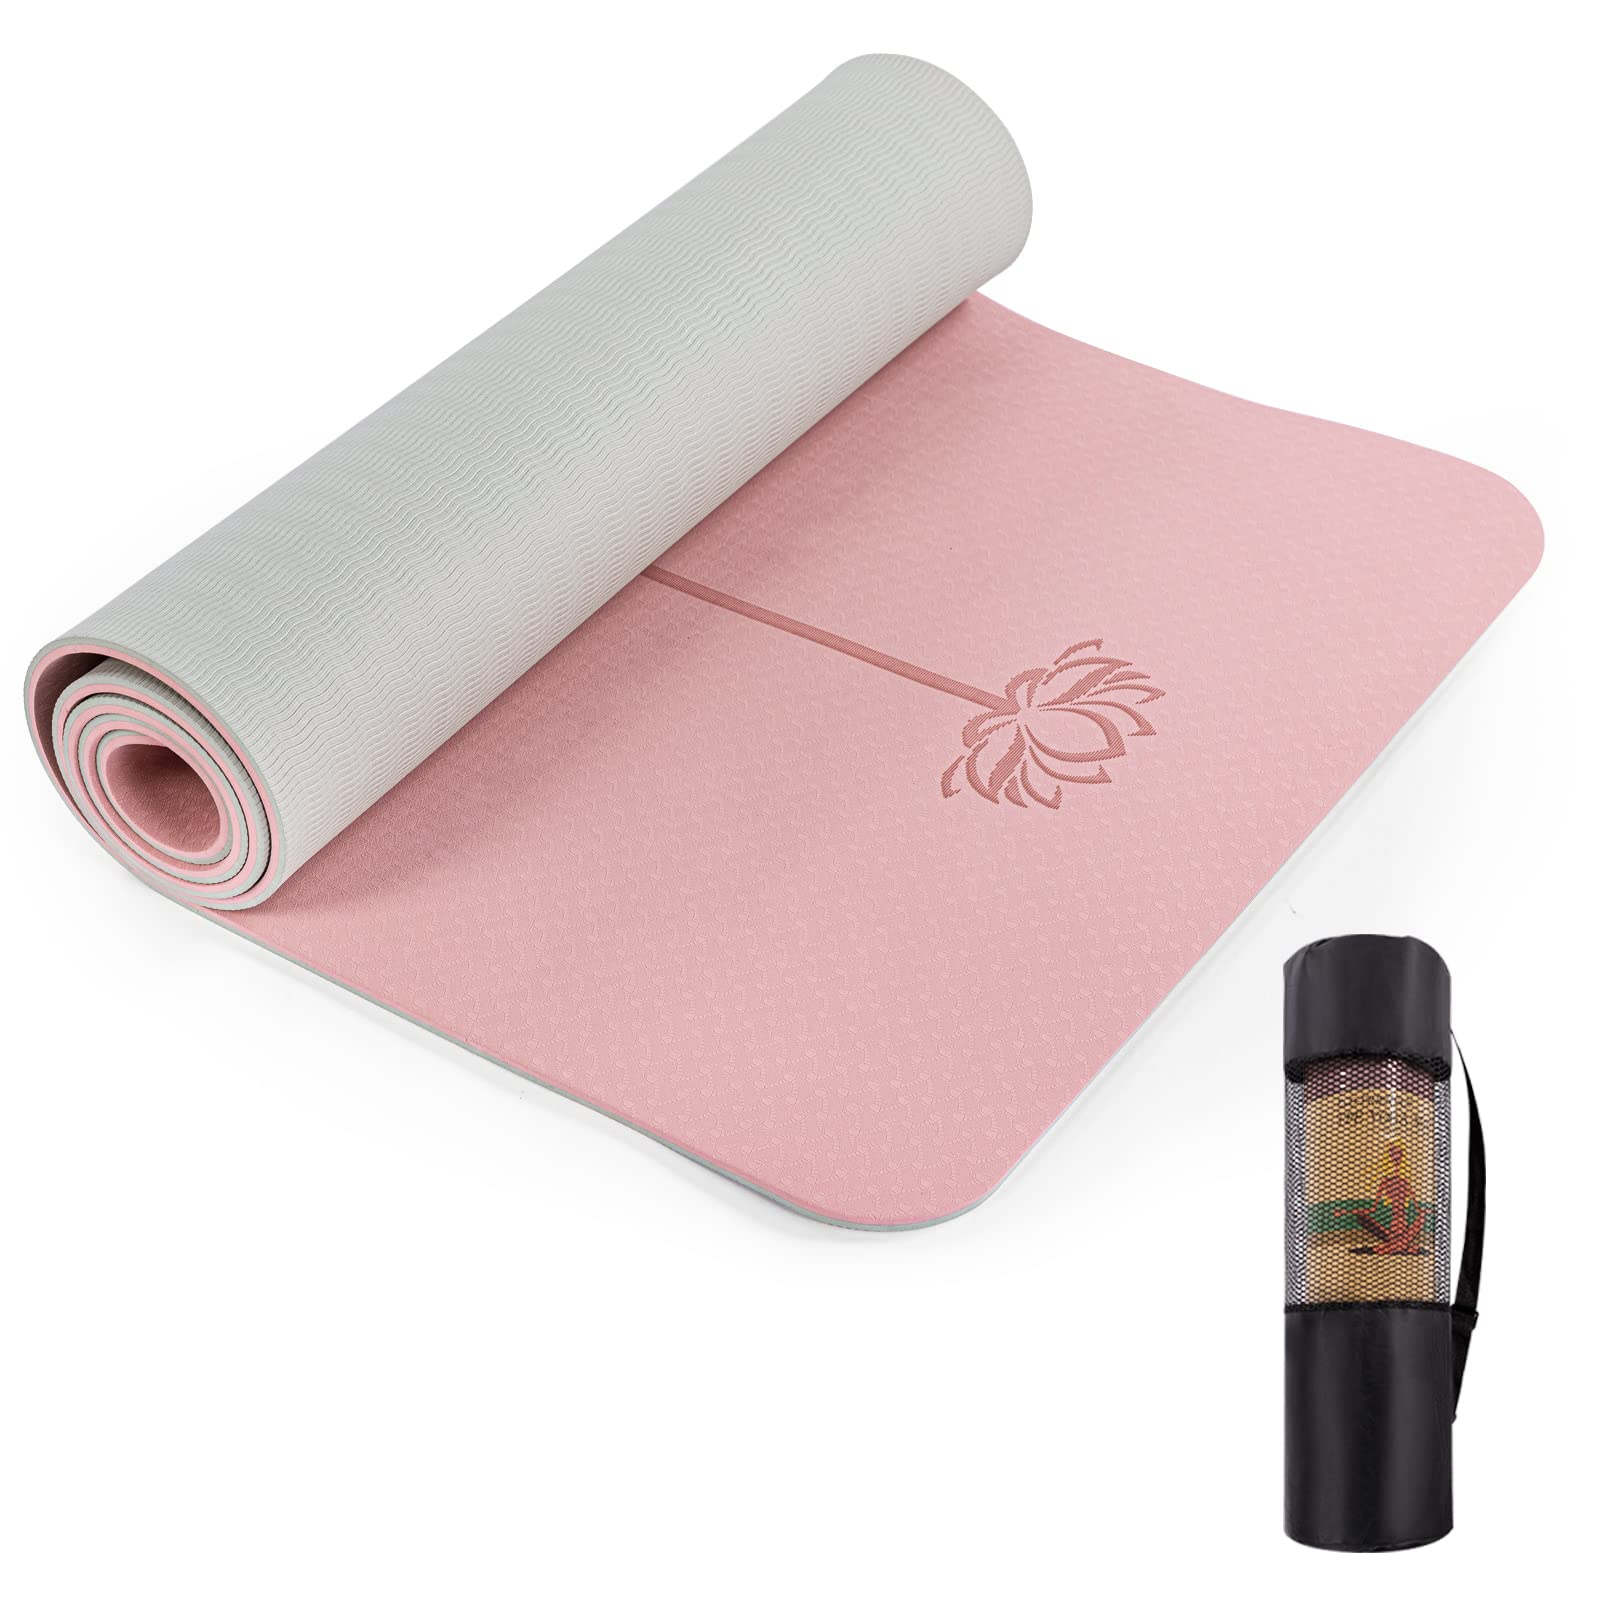 UMINEUX Yoga Mat Extra Thick 1/3'' Non Slip Yoga Mats for Women Eco  Friendly TPE Fitness Exercise Mat with Carrying Sling & Storage Bag  72x24x1/3 Parfait Pink & Gray